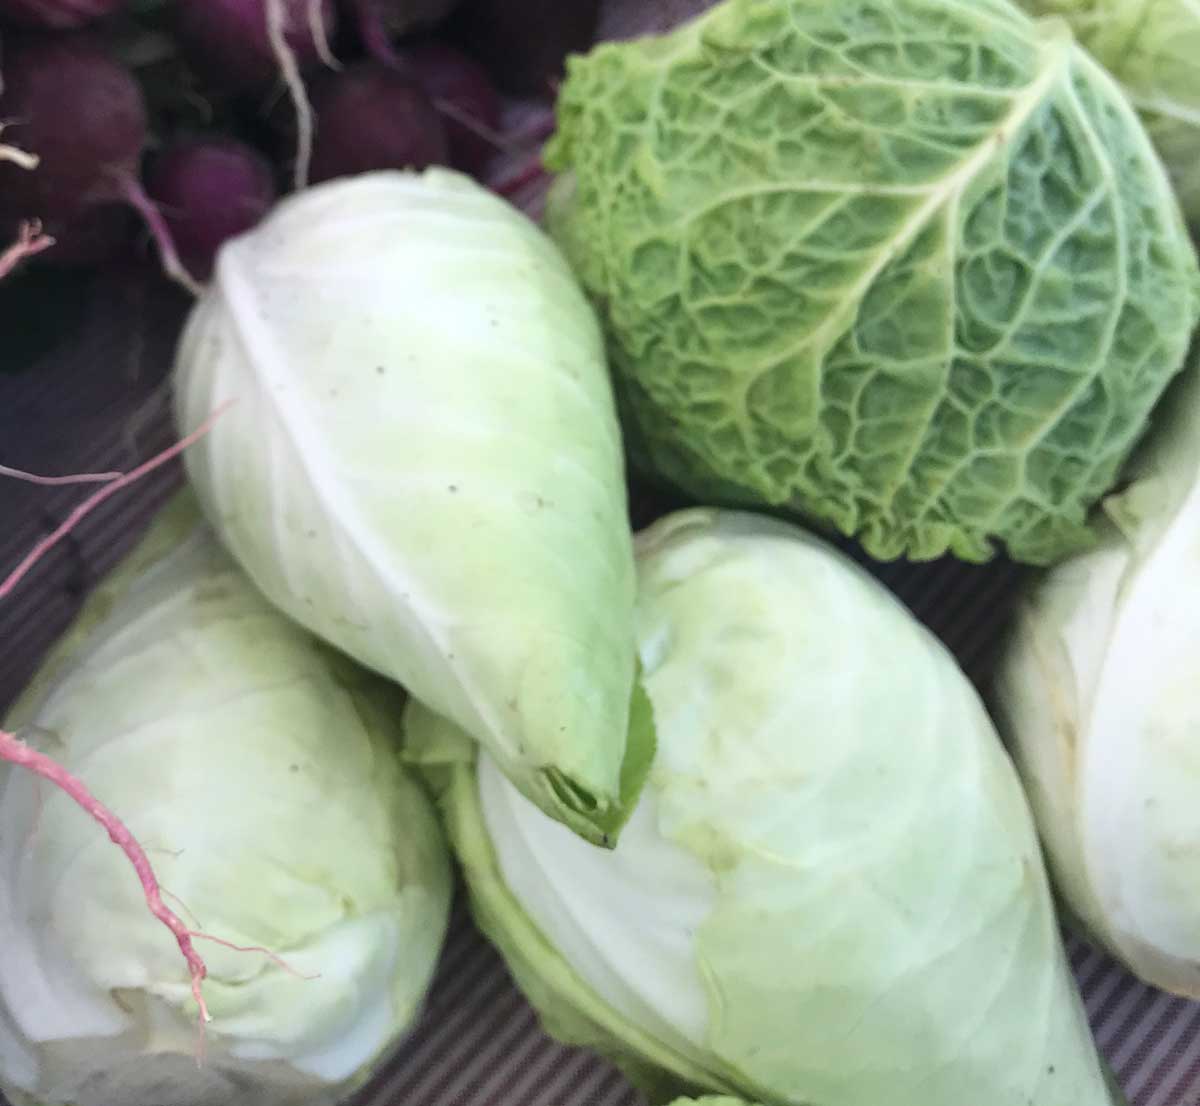 Cabbage at the market